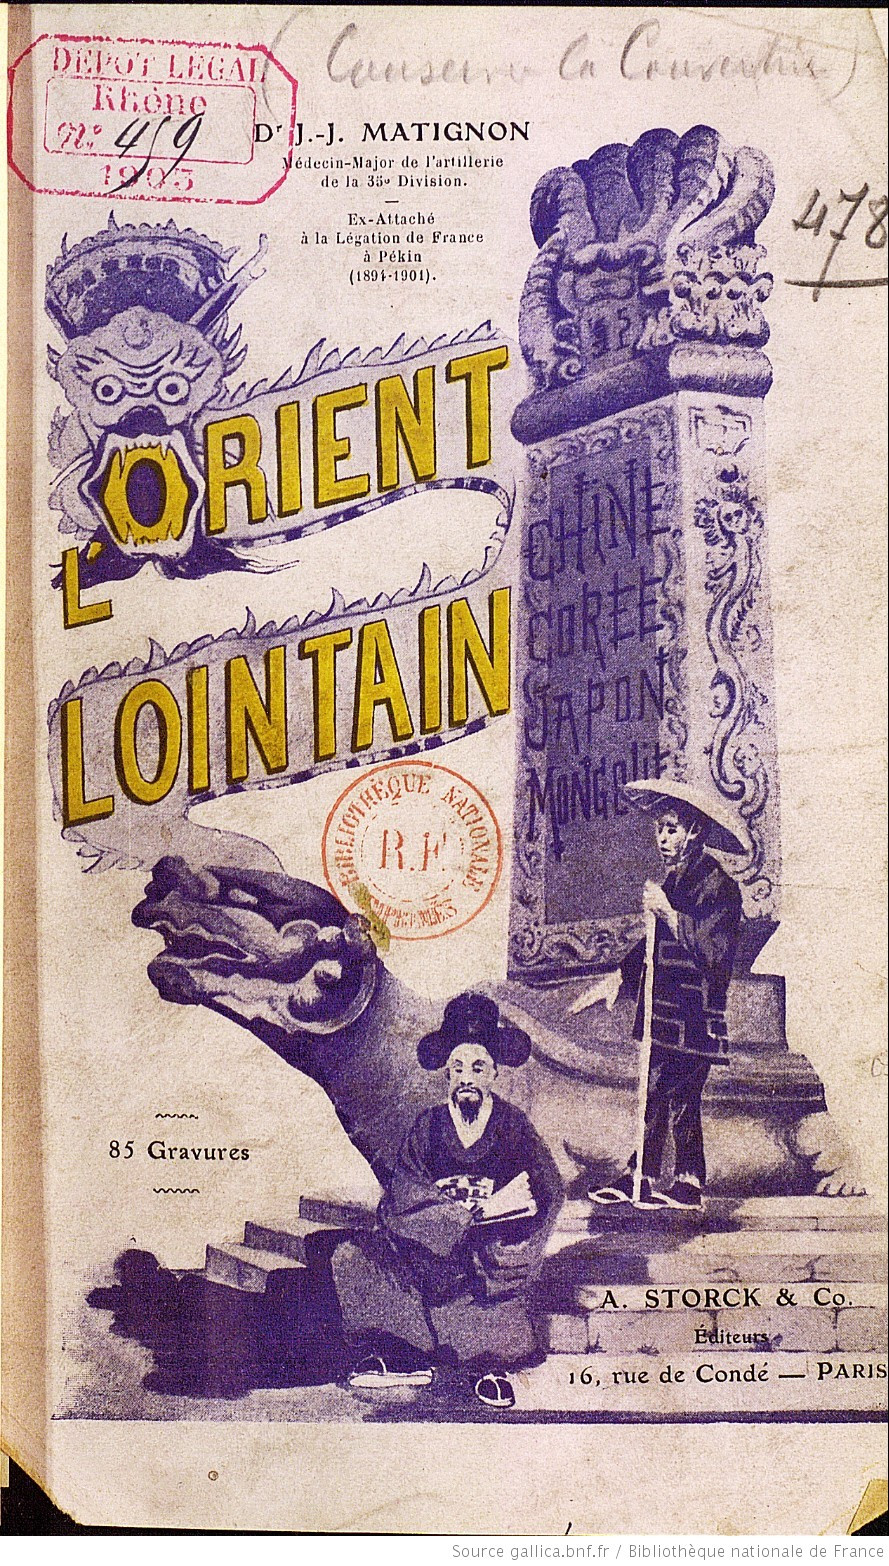 Cover of a book by Matignon representing a khmer sculpture with two southeast asian characters in popular clothing